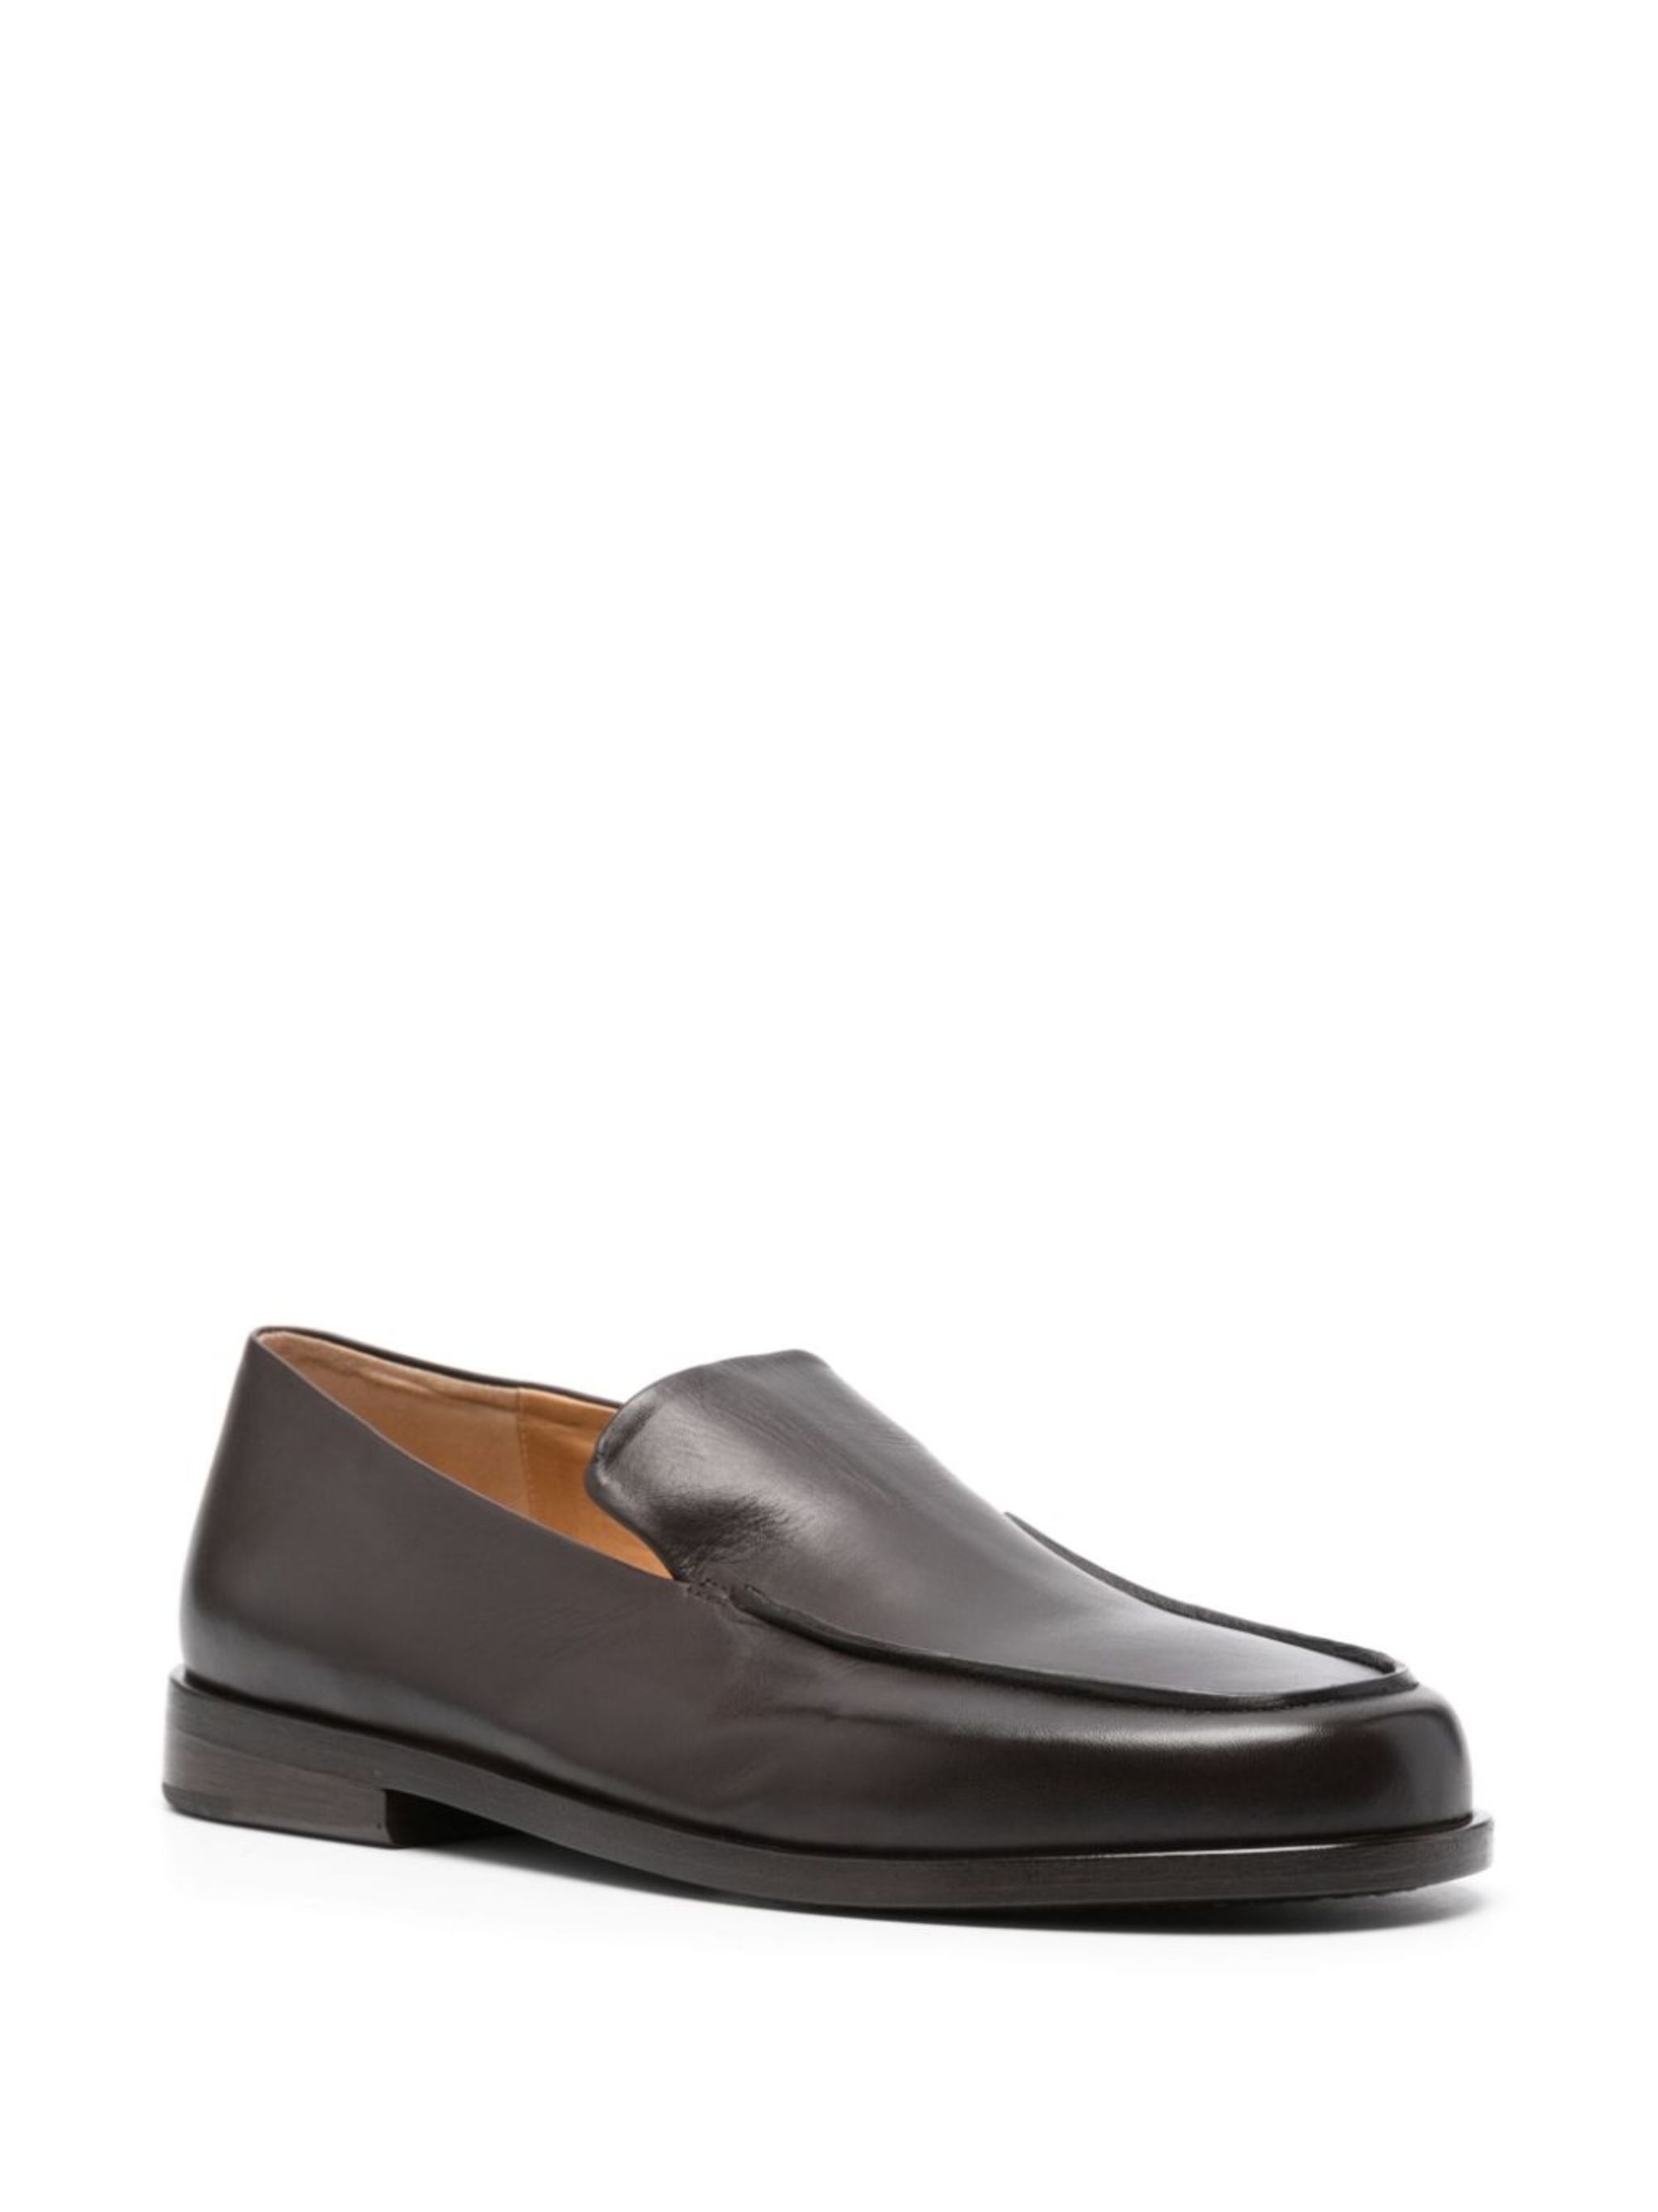 leather slip-on loafers - 2